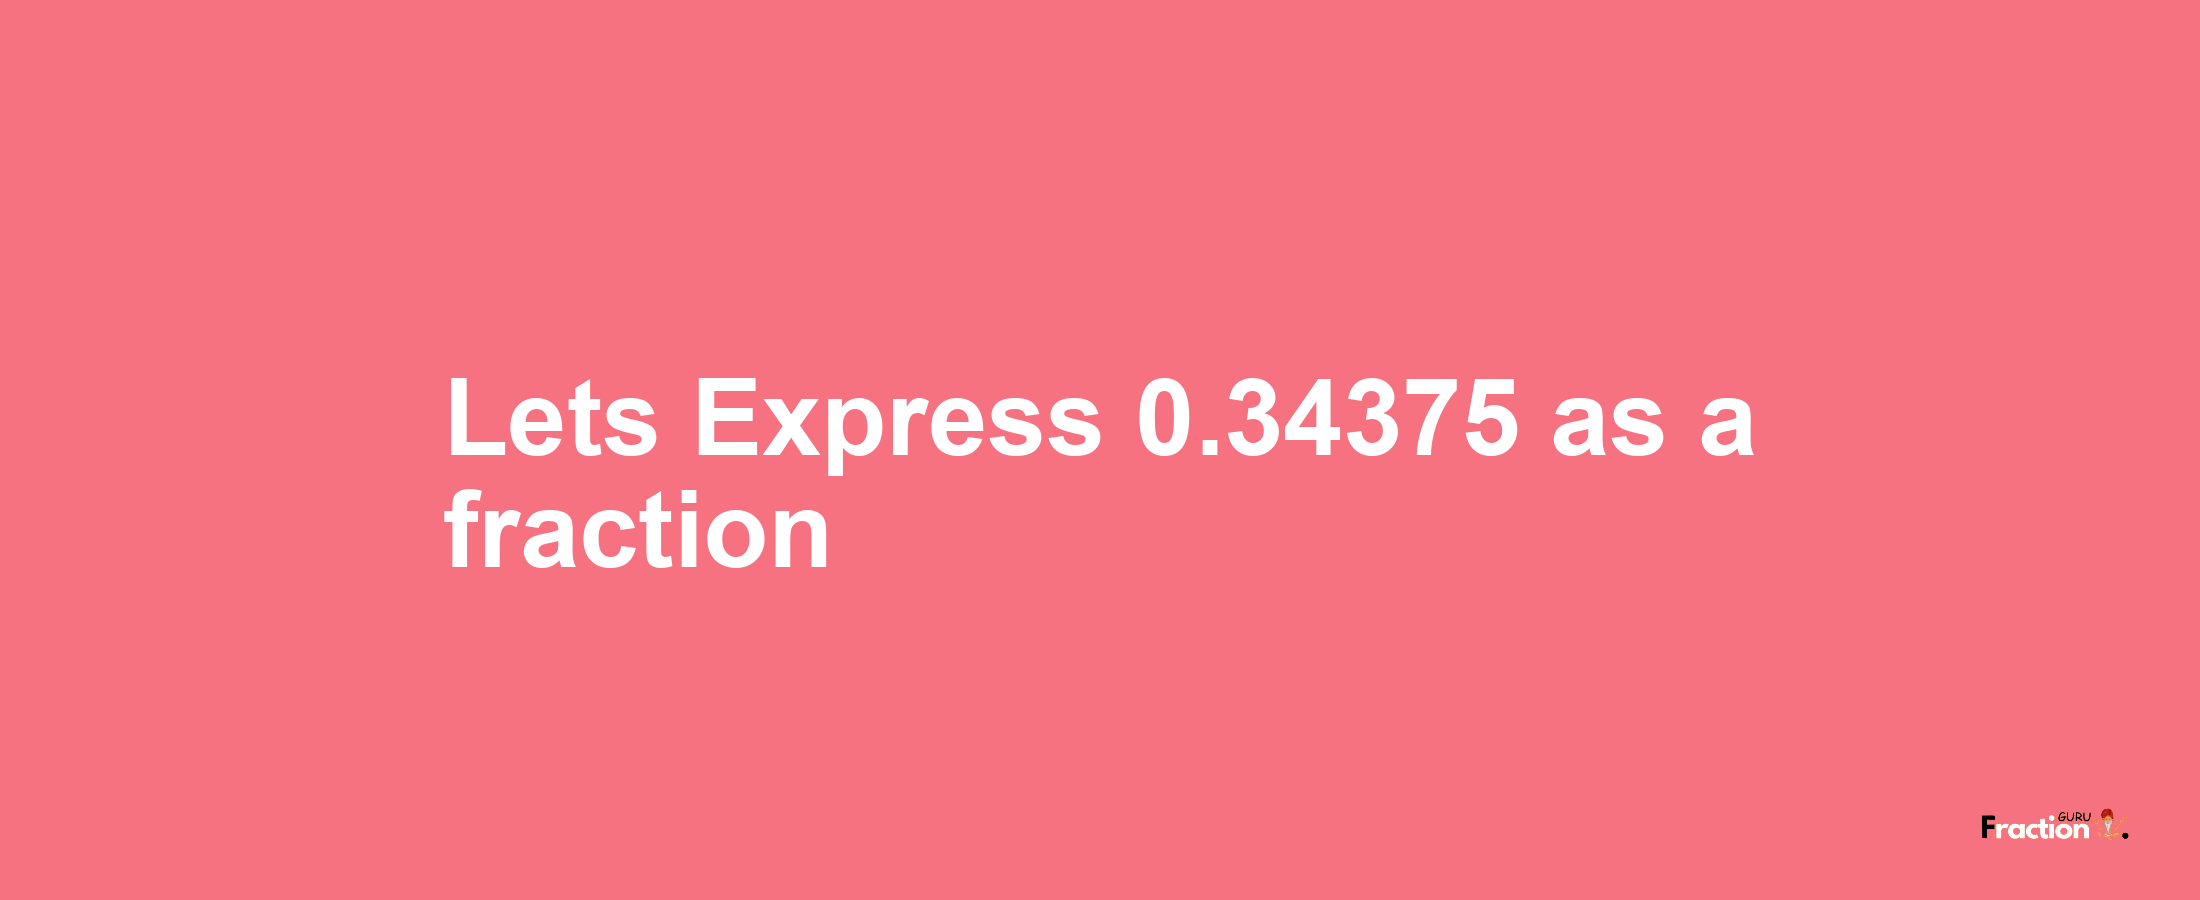 Lets Express 0.34375 as afraction